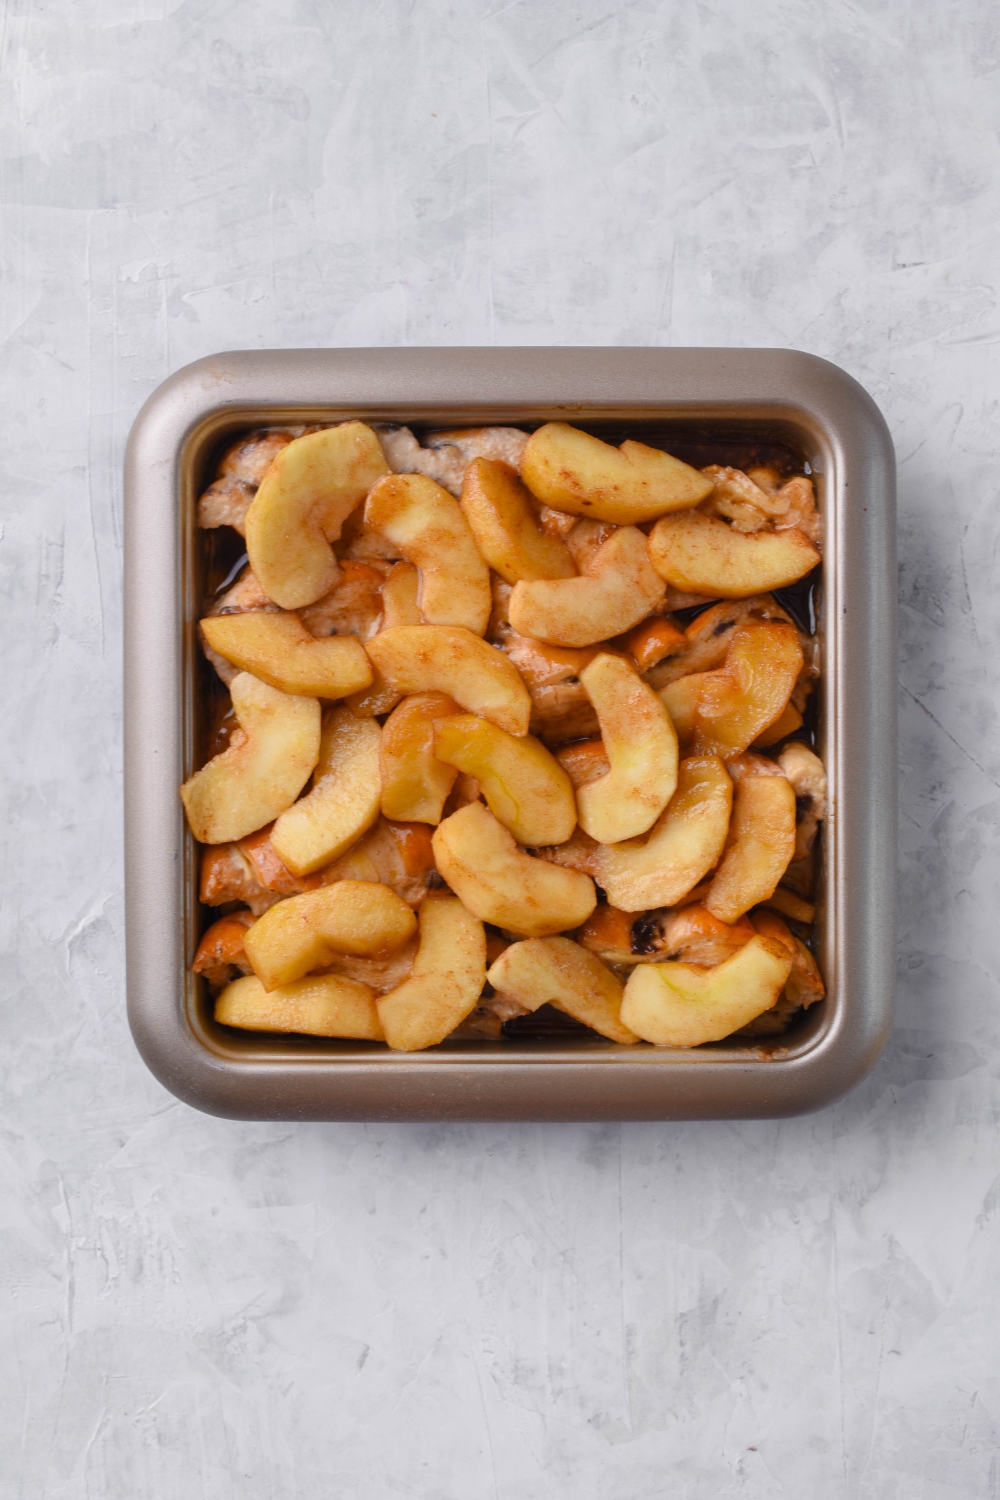 A square baking dish filled with bread slices topped with stewed apples covered in cinnamon.